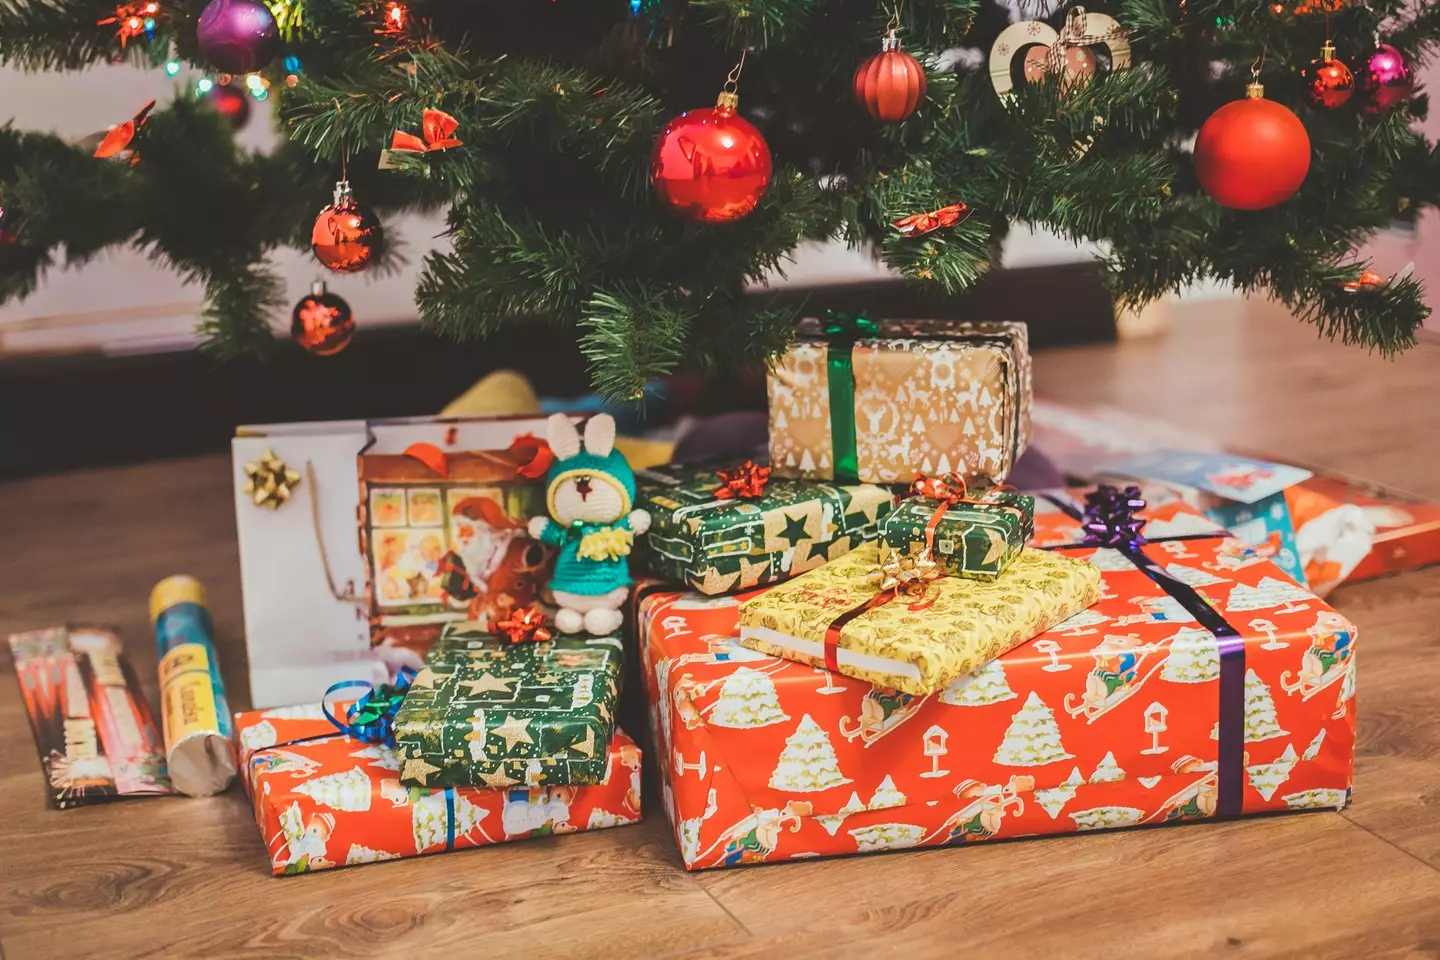 An ER doctor has shared the five presents she'd never get her children for Christmas.